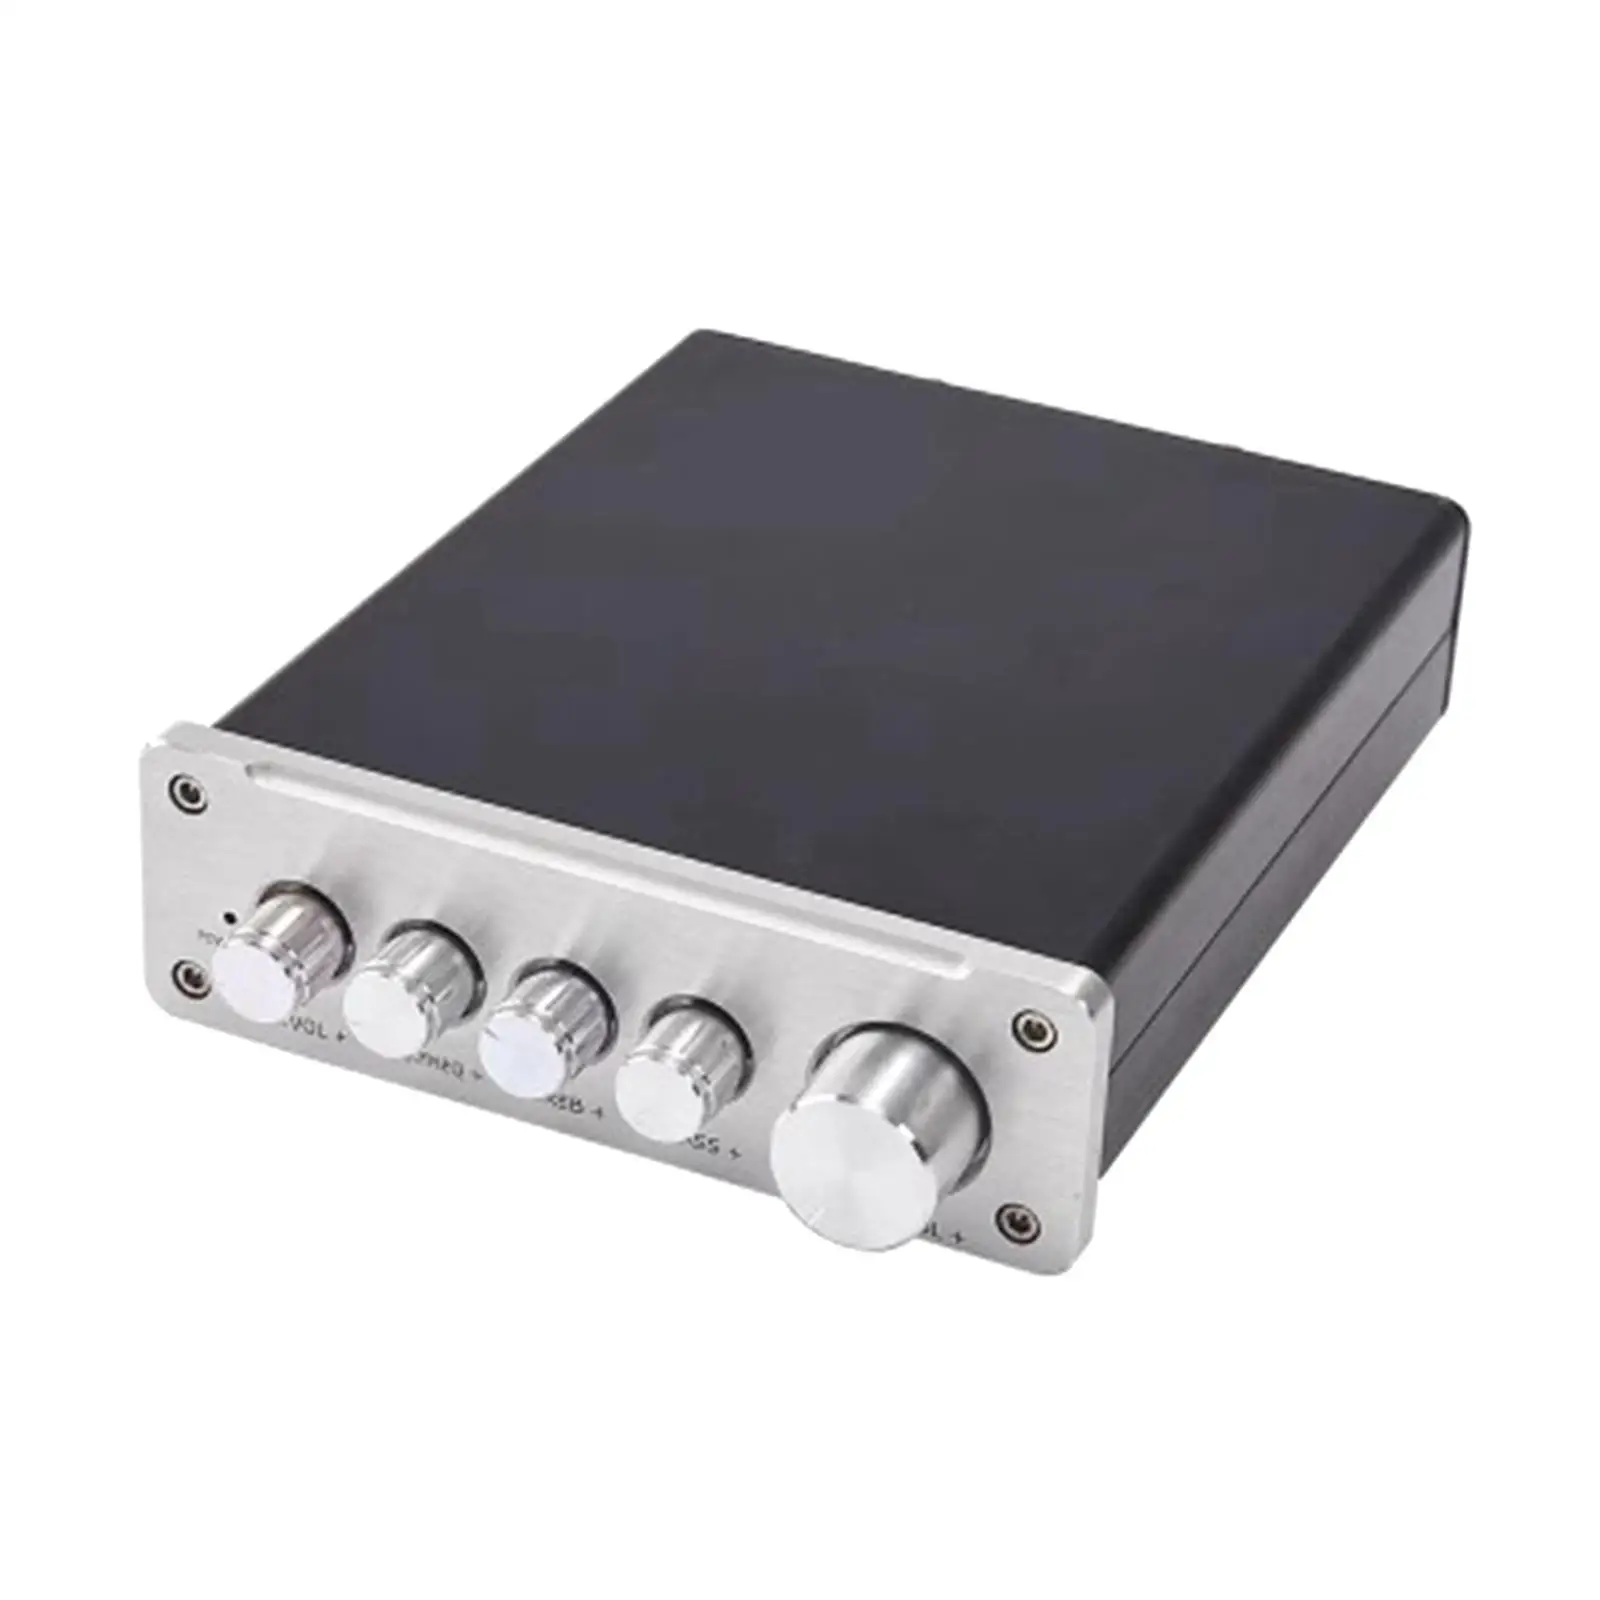 Power Amplifier D3 Professional with Volume Adjustment Knob HiFi Surround Sound for Home Outdoor Performances Party Outdoor KTV